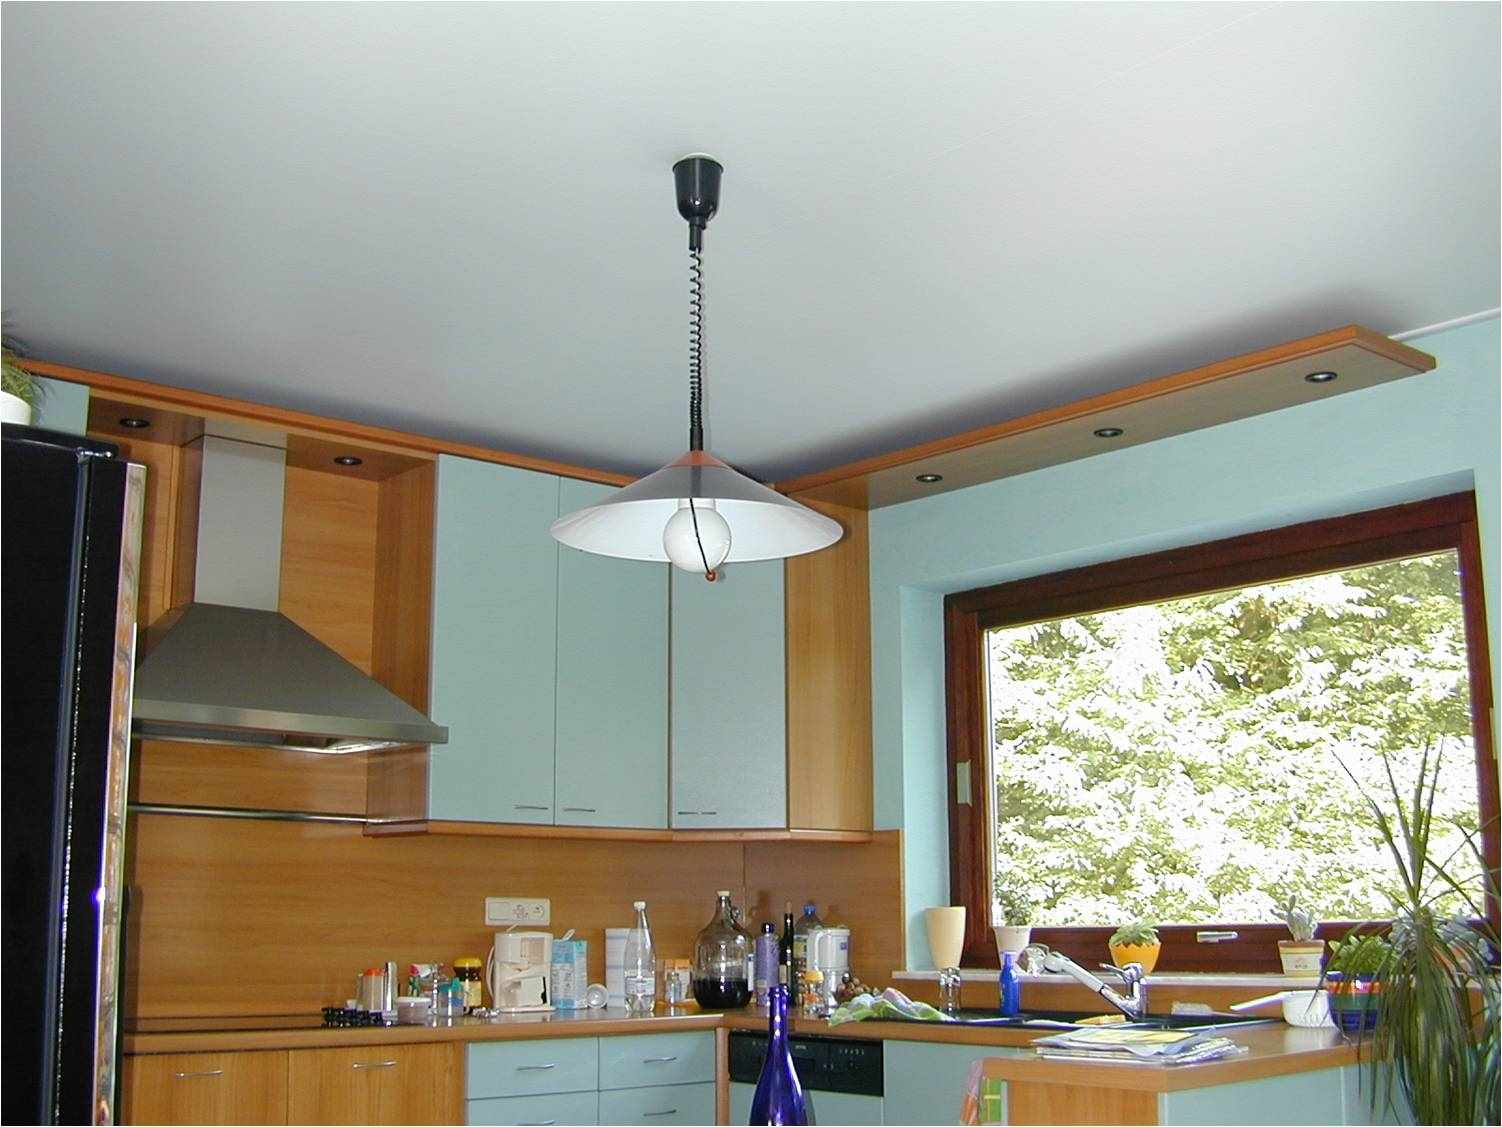 an example of an unusual interior of a kitchen ceiling